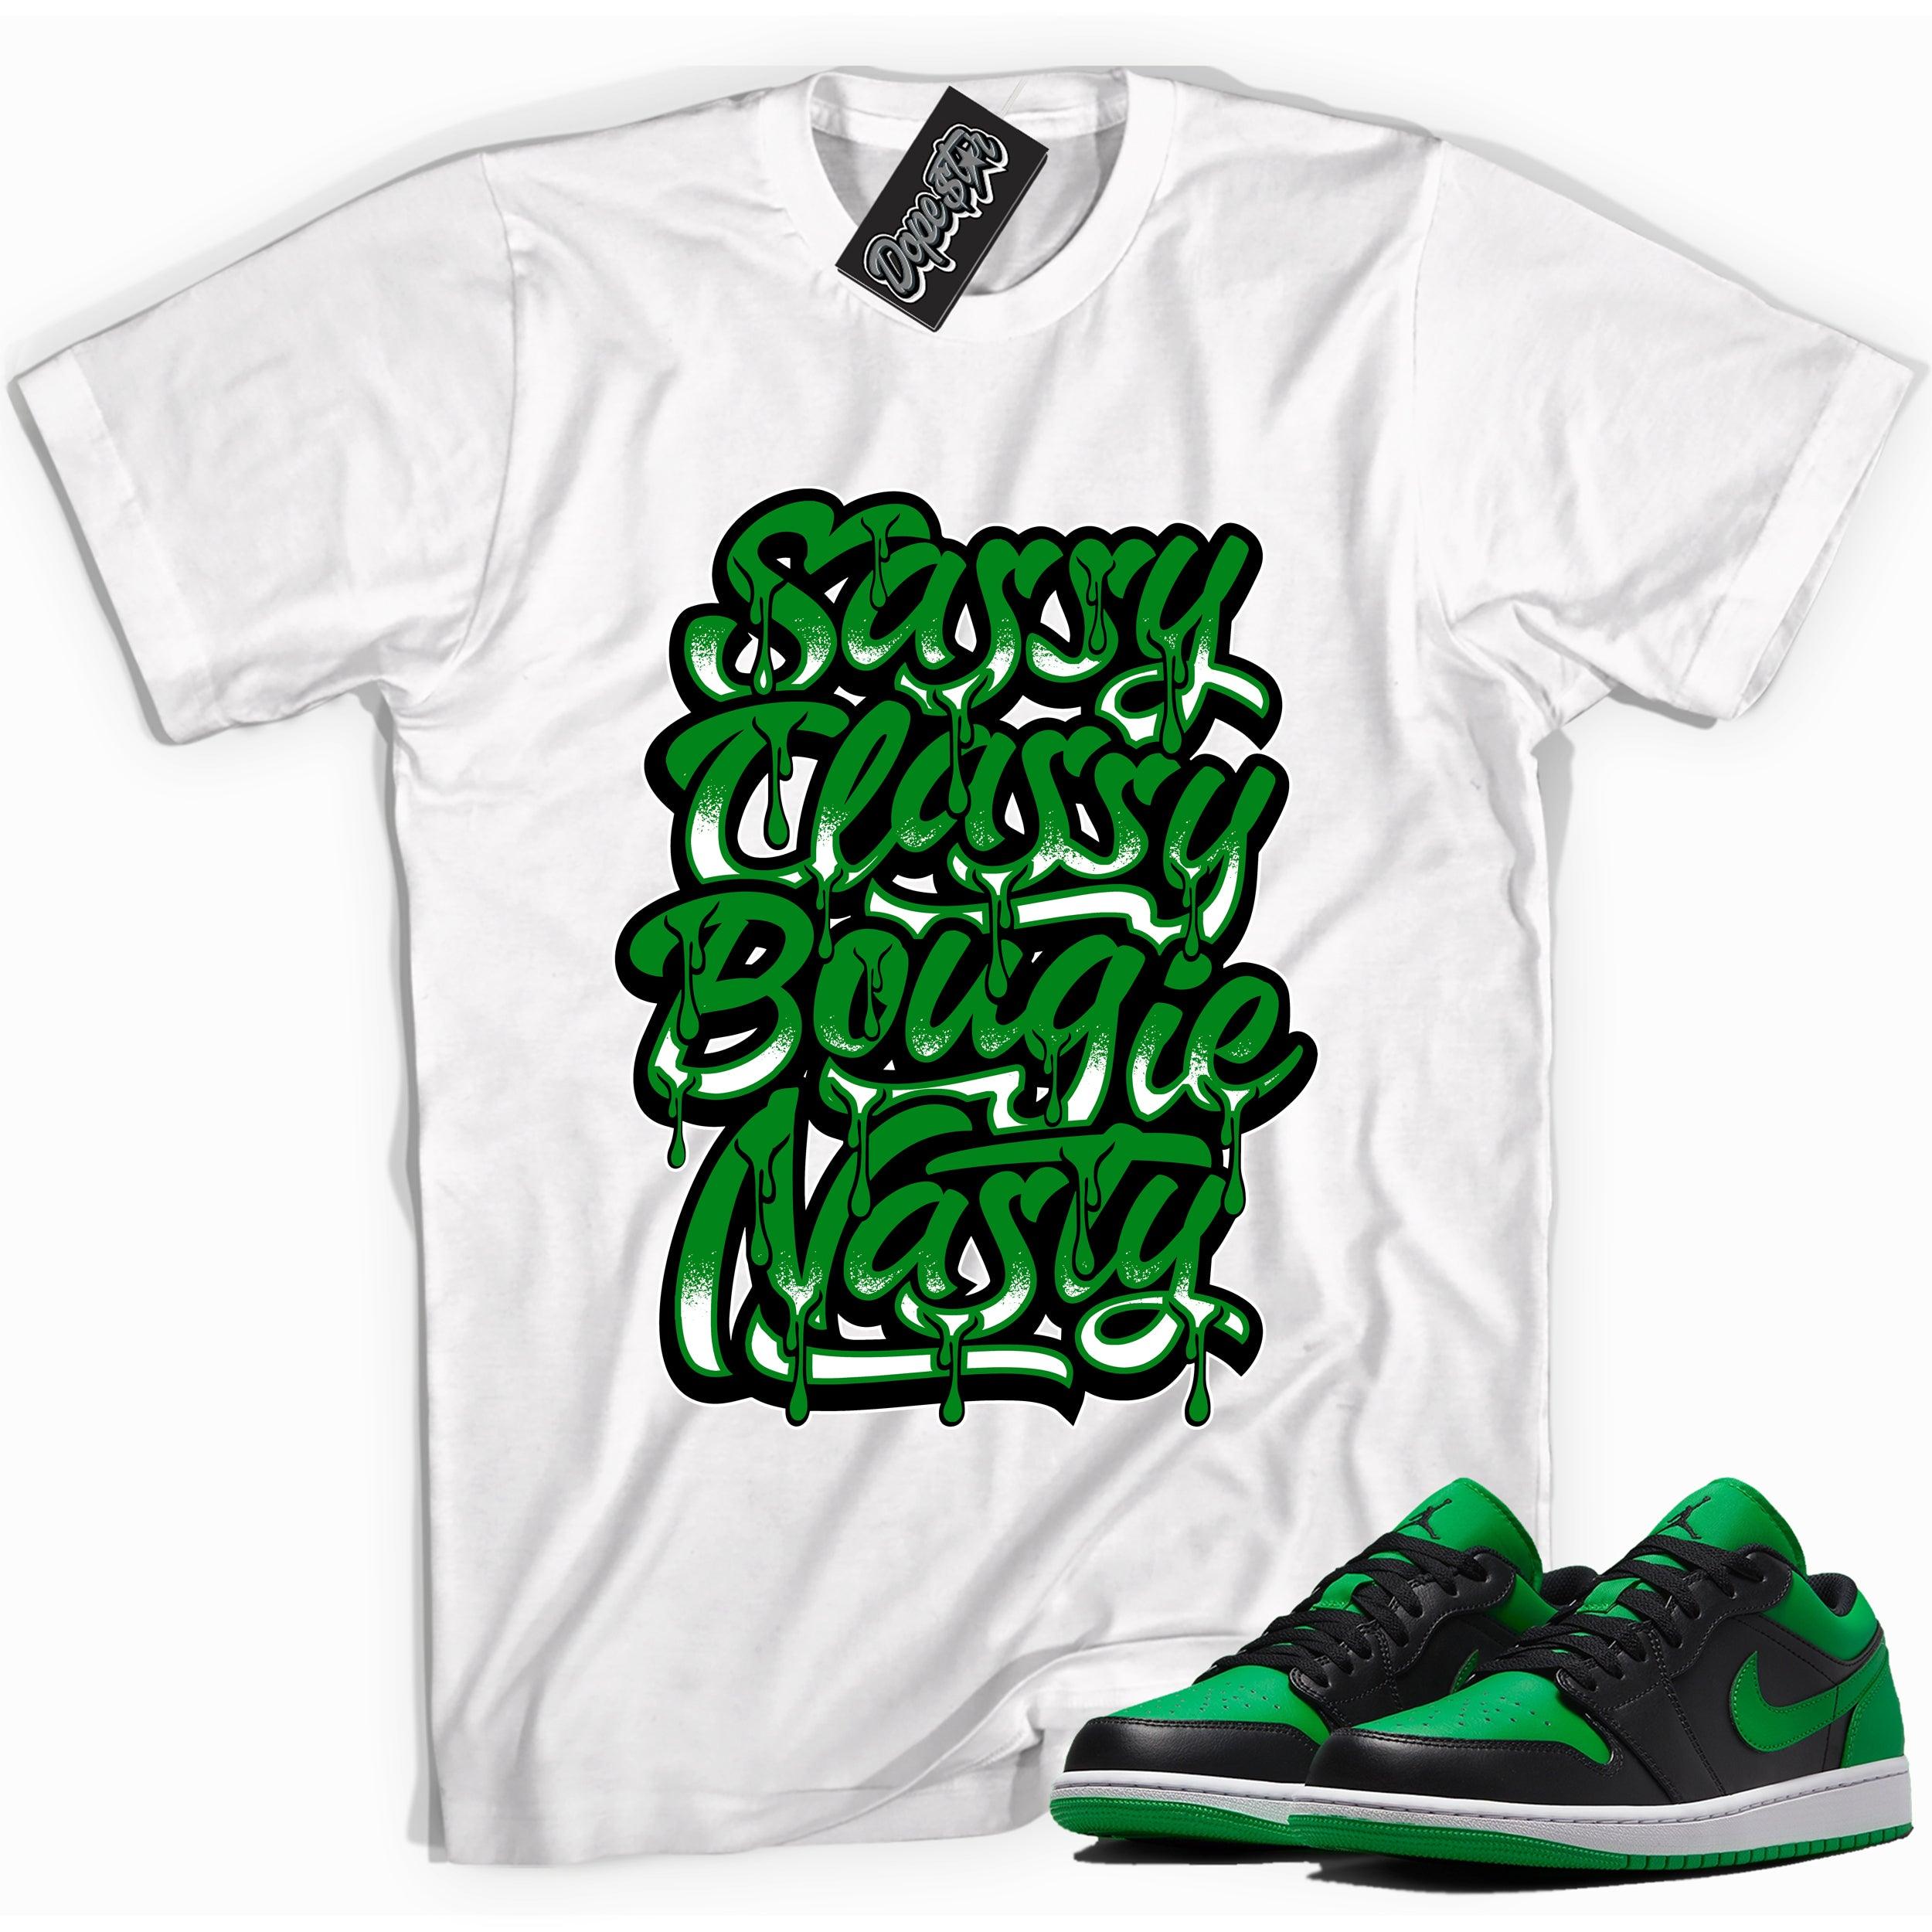 Cool white graphic tee with 'sassy classy' print, that perfectly matches Air Jordan 1 Low Lucky Green sneakers